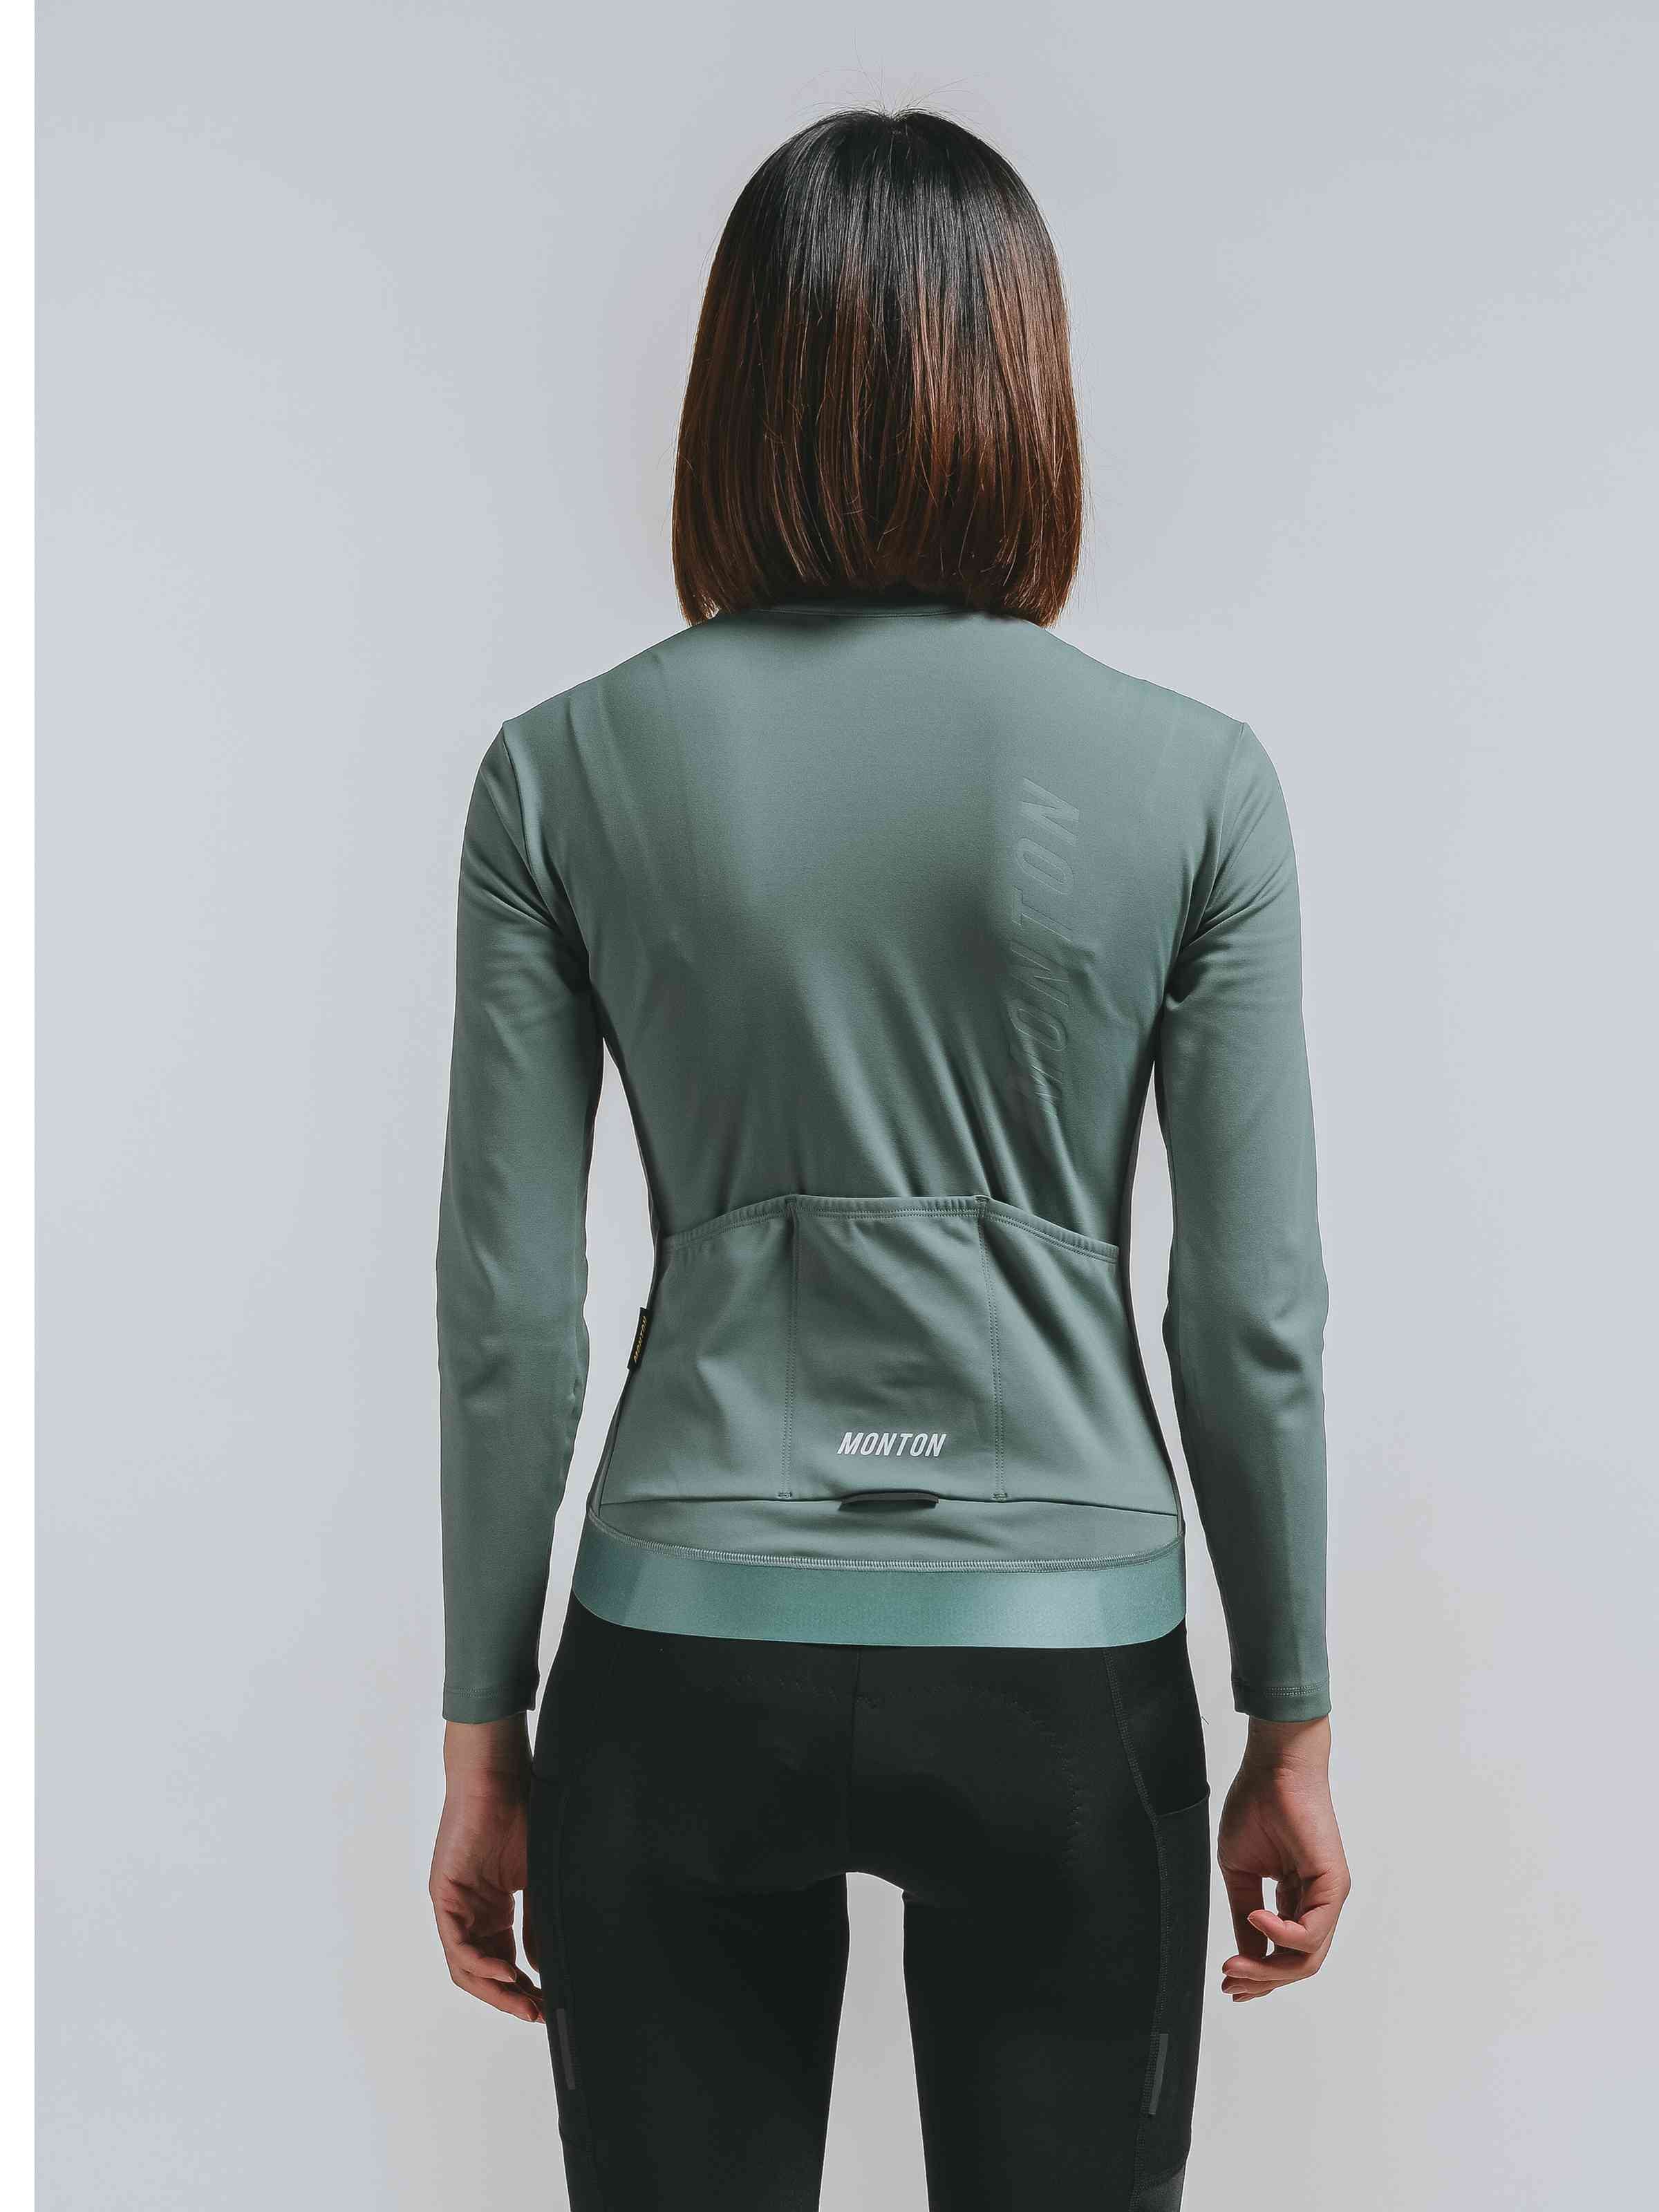 green womens thermal cycling jersey